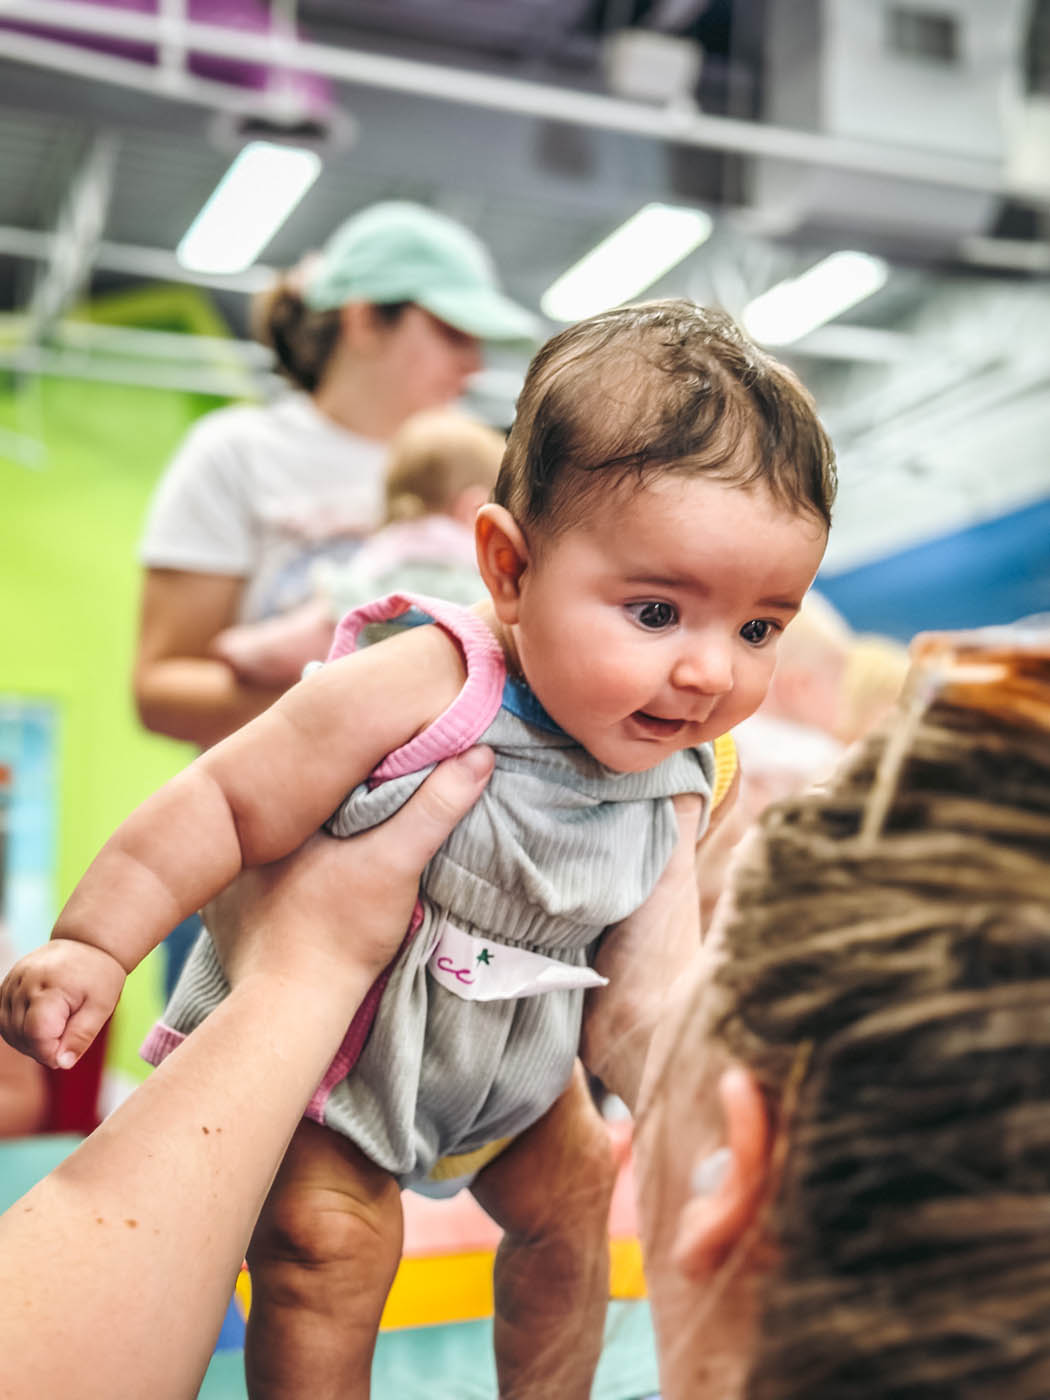 A baby being held in the air at Romp n' Roll's classes for babies.